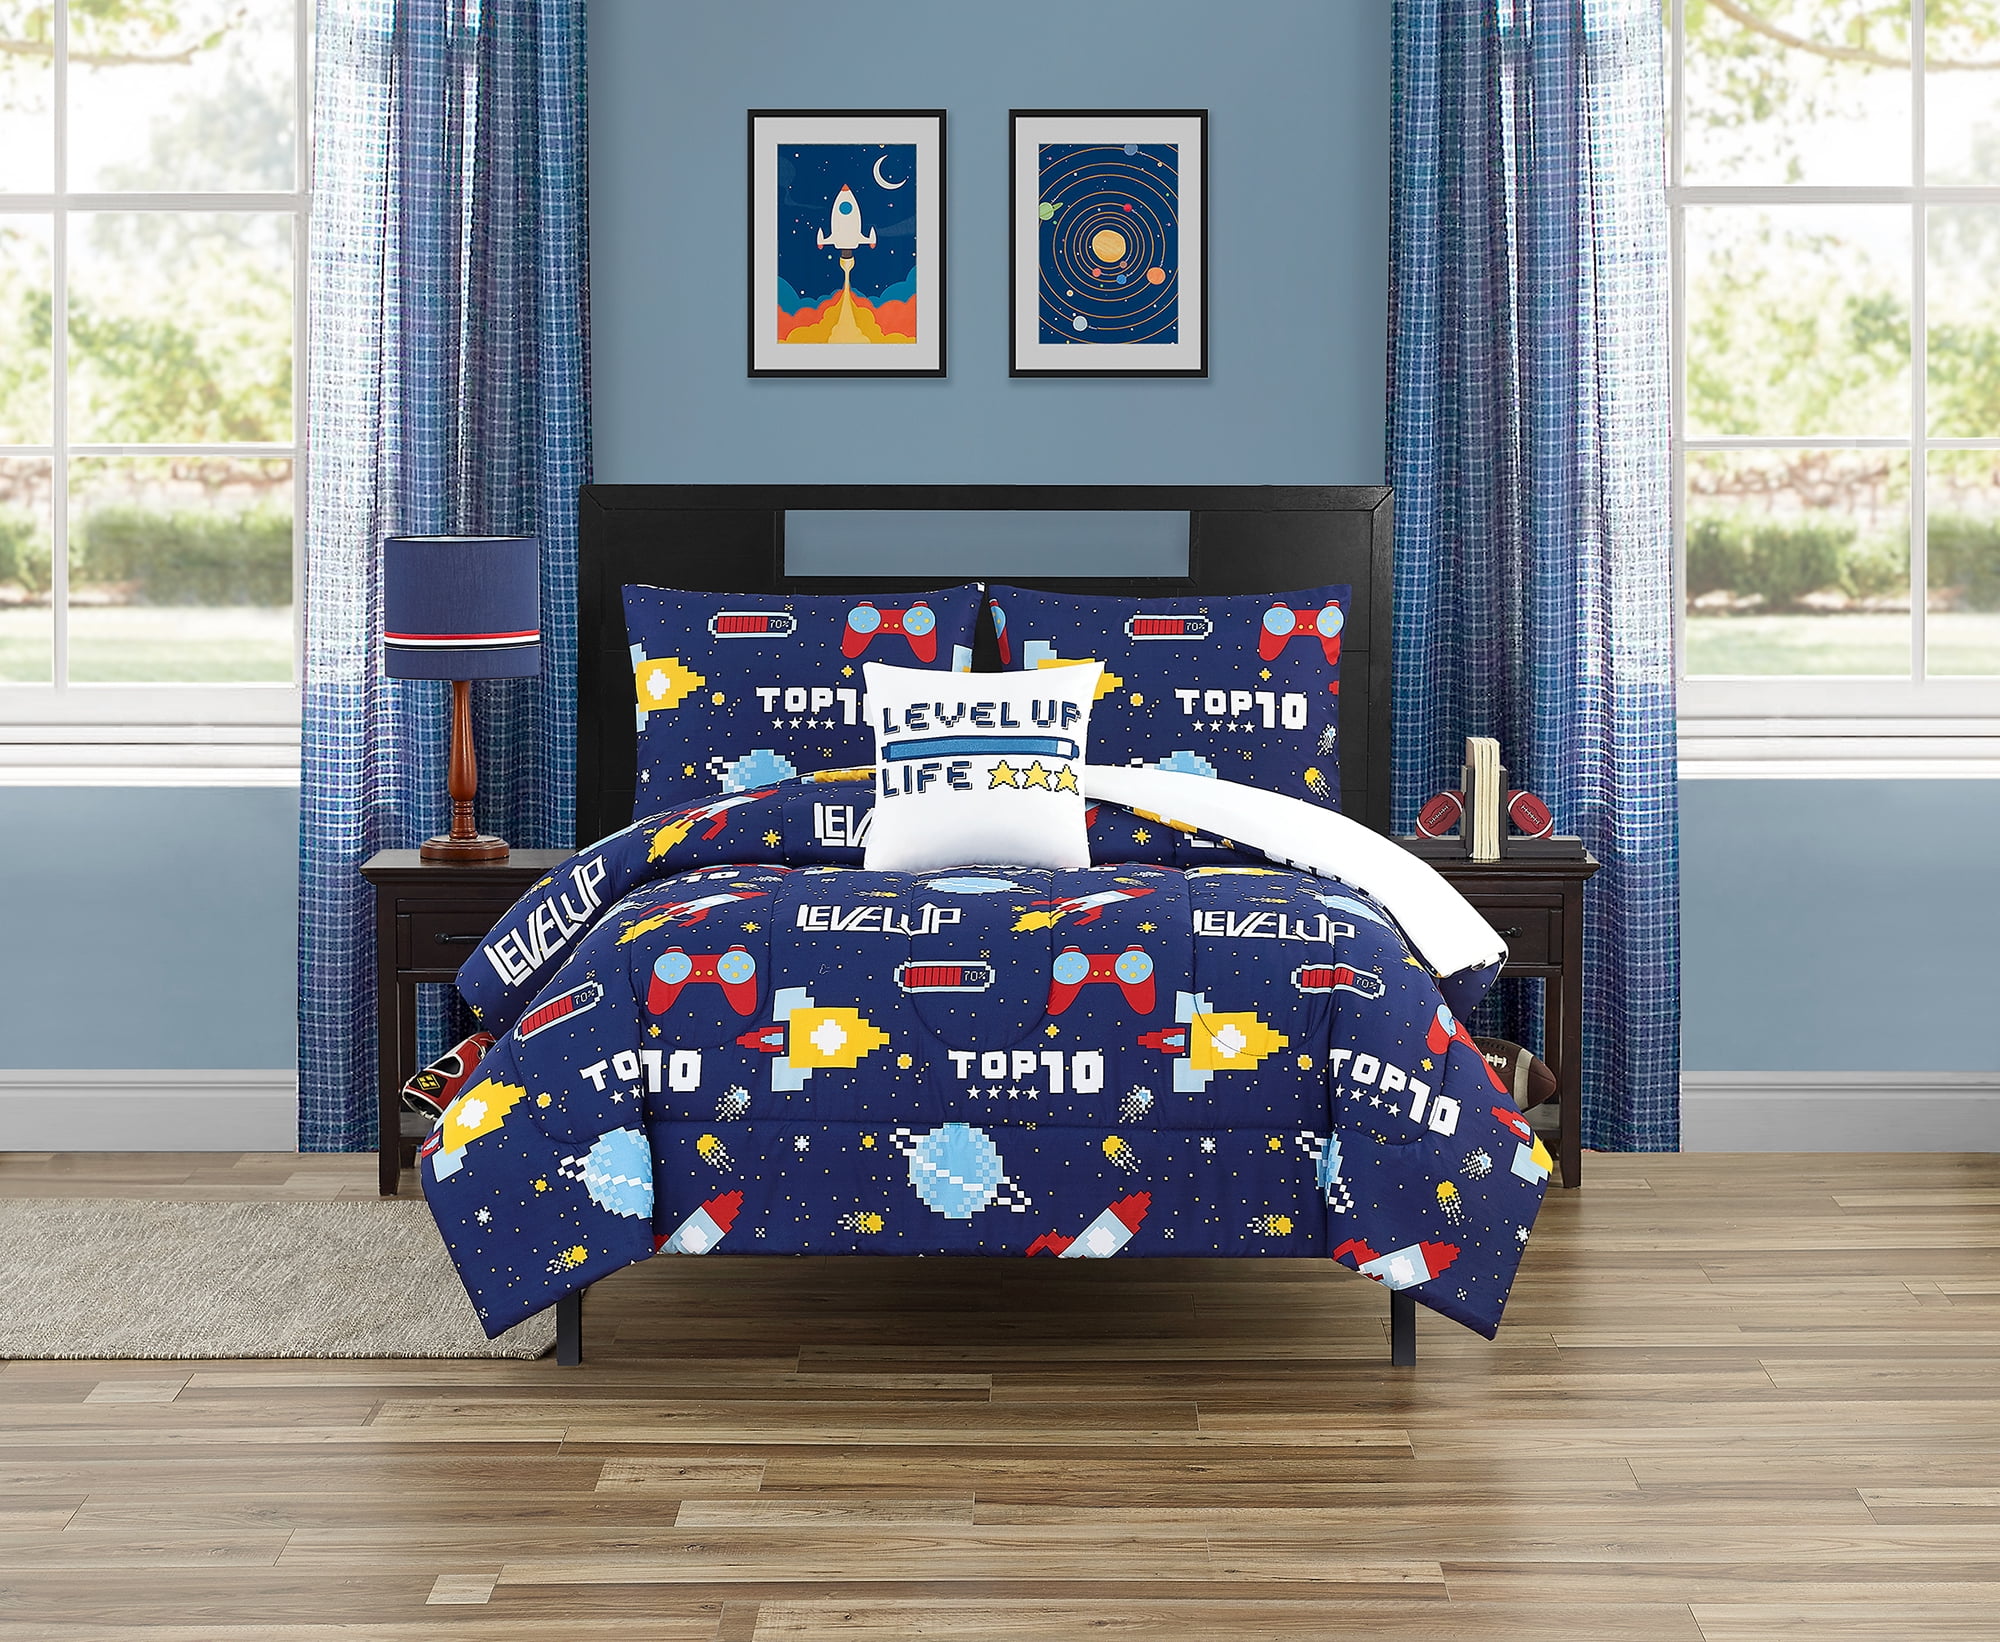 Basketball Bedding Set Full Size Ball Sports Gaming Theme Comforter Set 3 Pcs for Kids Teens Adults Basketball Hoop Hippie Graffiti Bedding Comforters Bedroom Decor Soft with 2 Pillowcases 